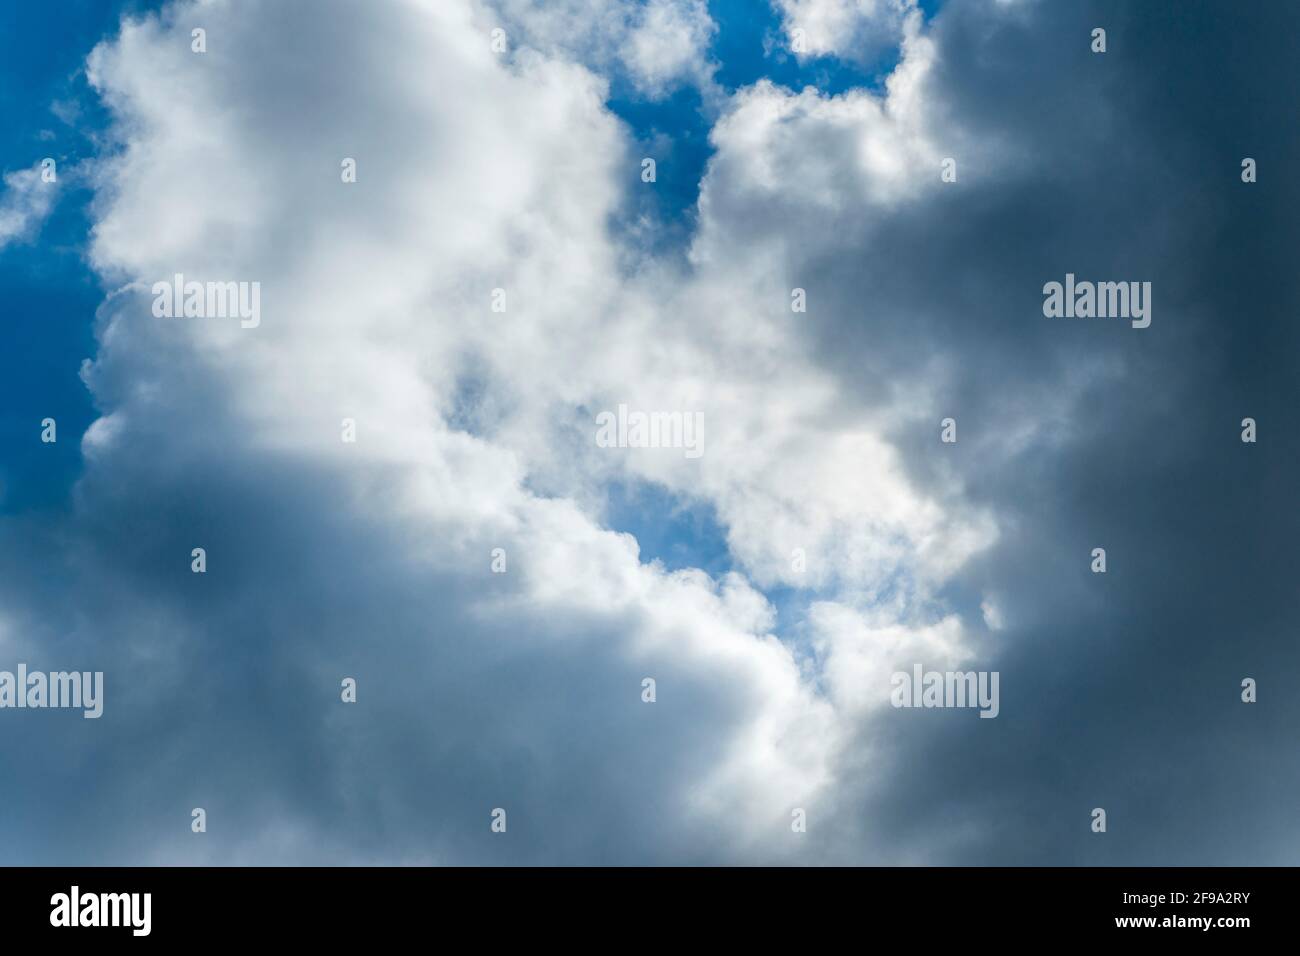 Germany, Baden-Wuerttemberg, cloud mood, white and dark clouds, blue sky Stock Photo